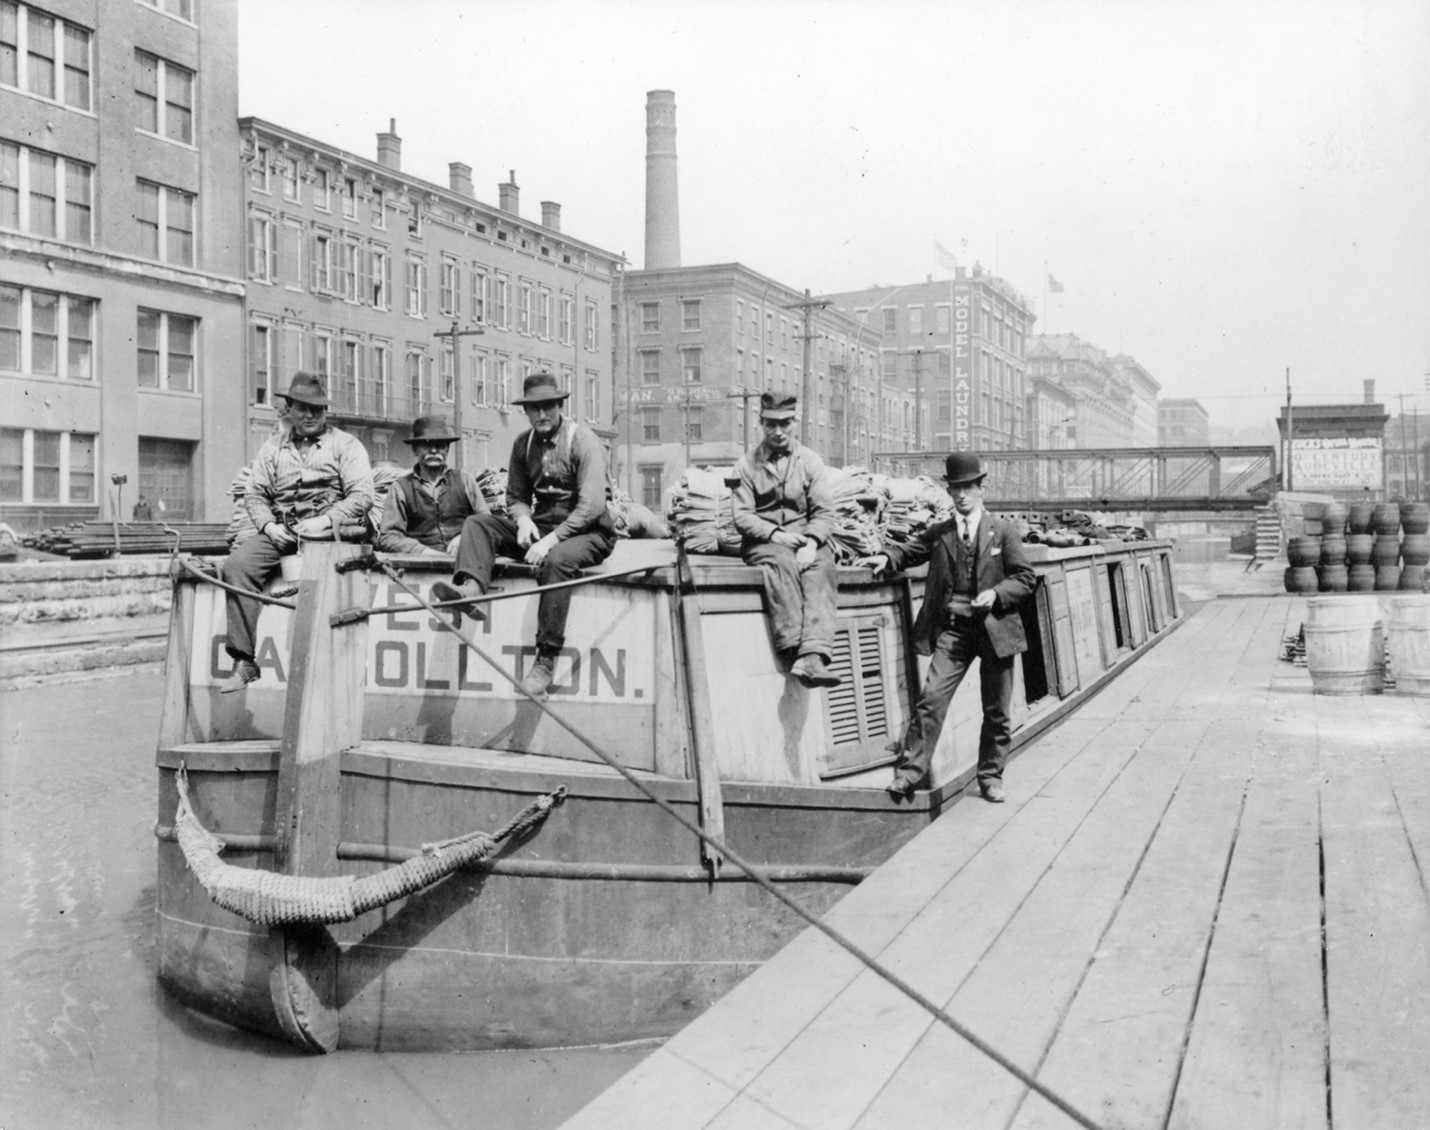 Black and white photograph of five men standing on a canal boat. Building line the canal in the background.